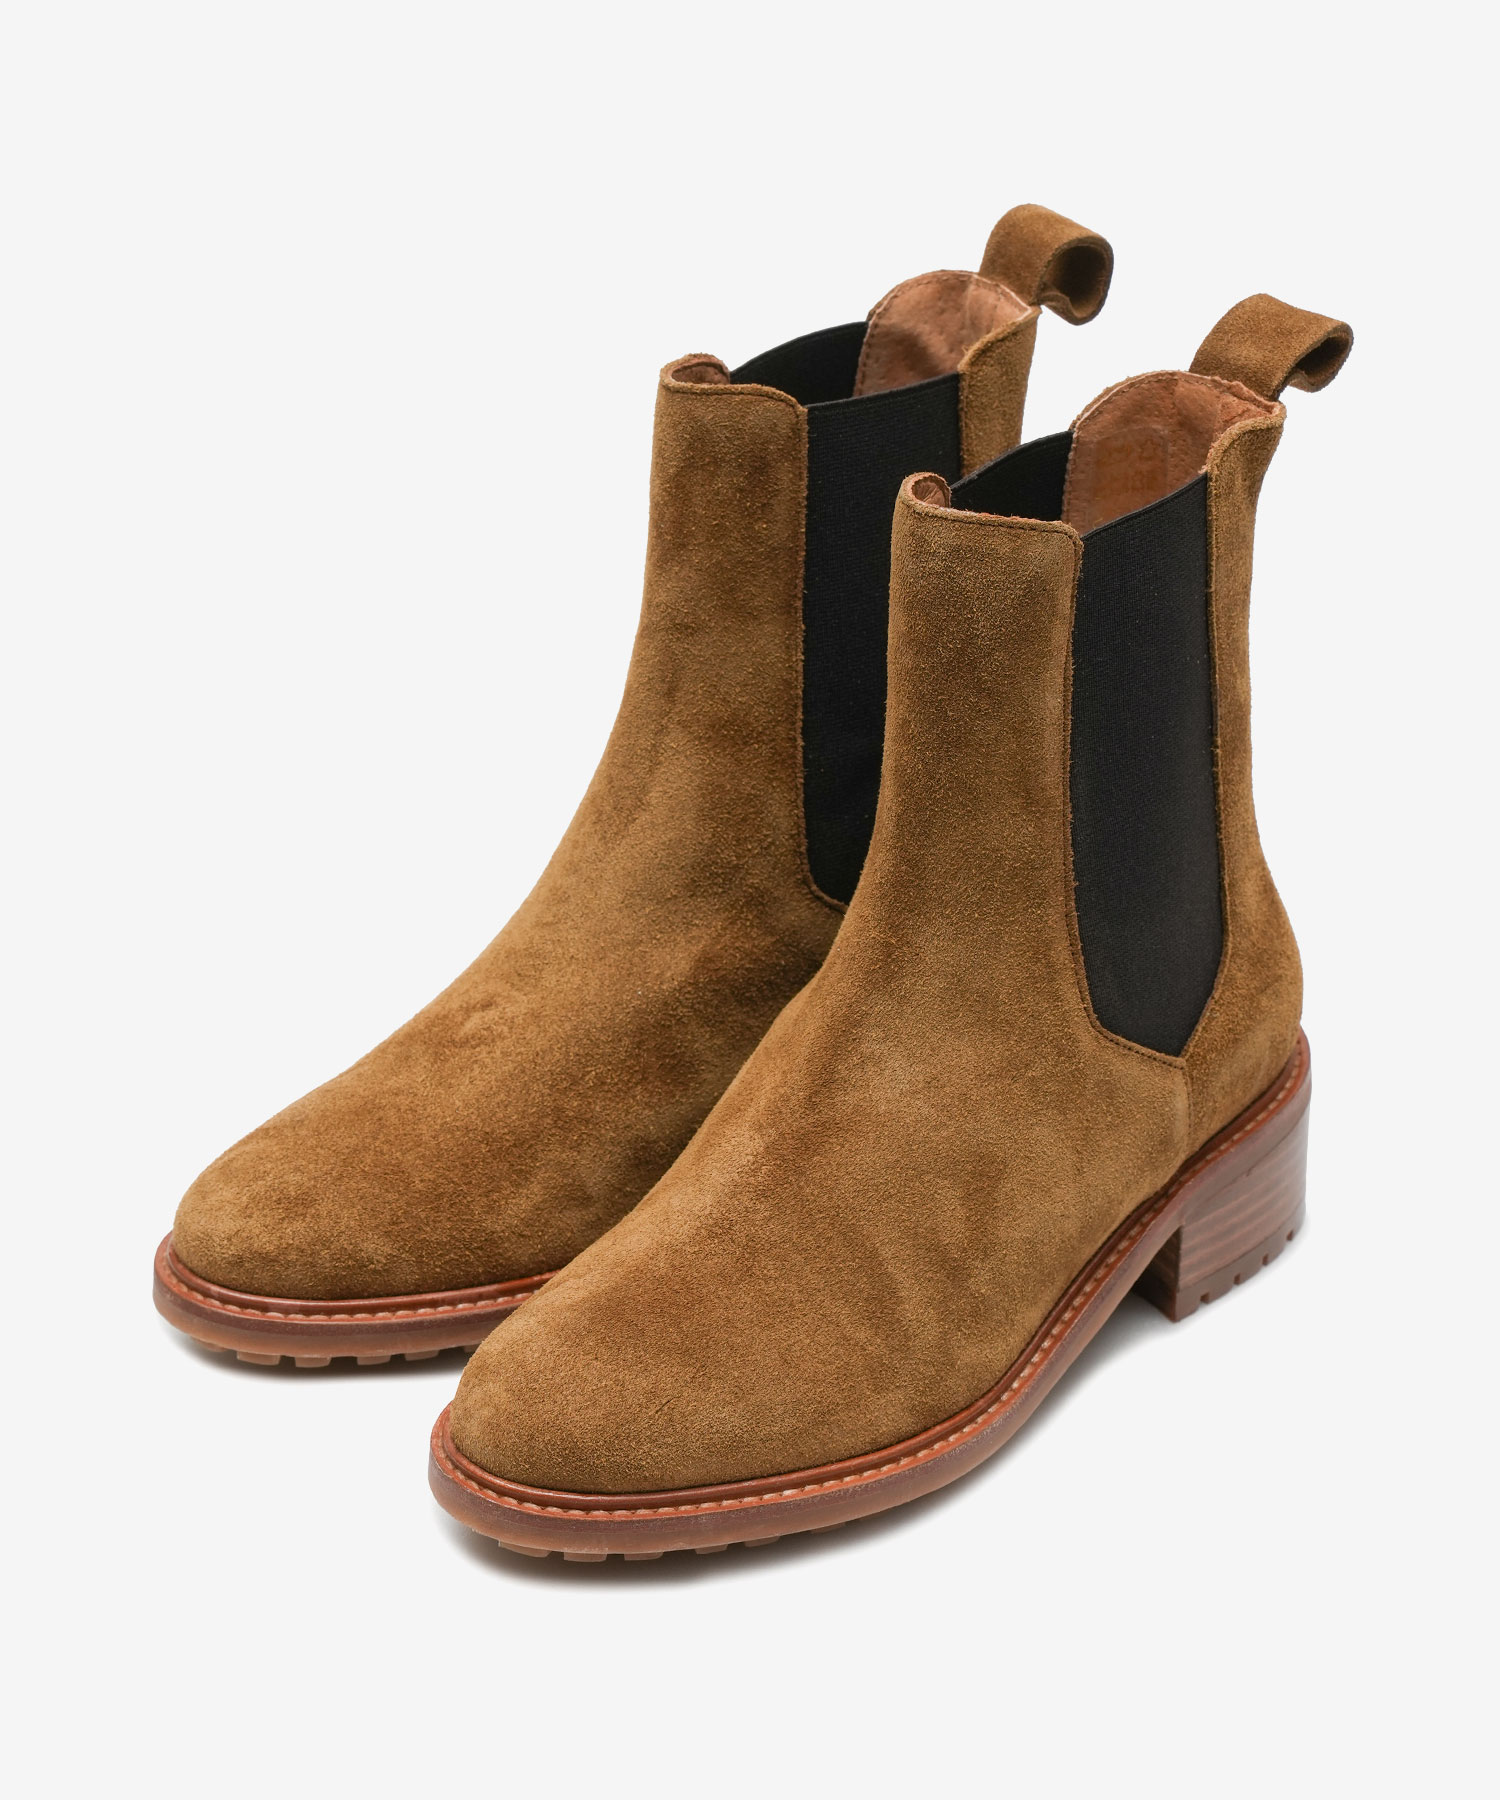 SUEDE CHELSEA BOOTS - CAMEL